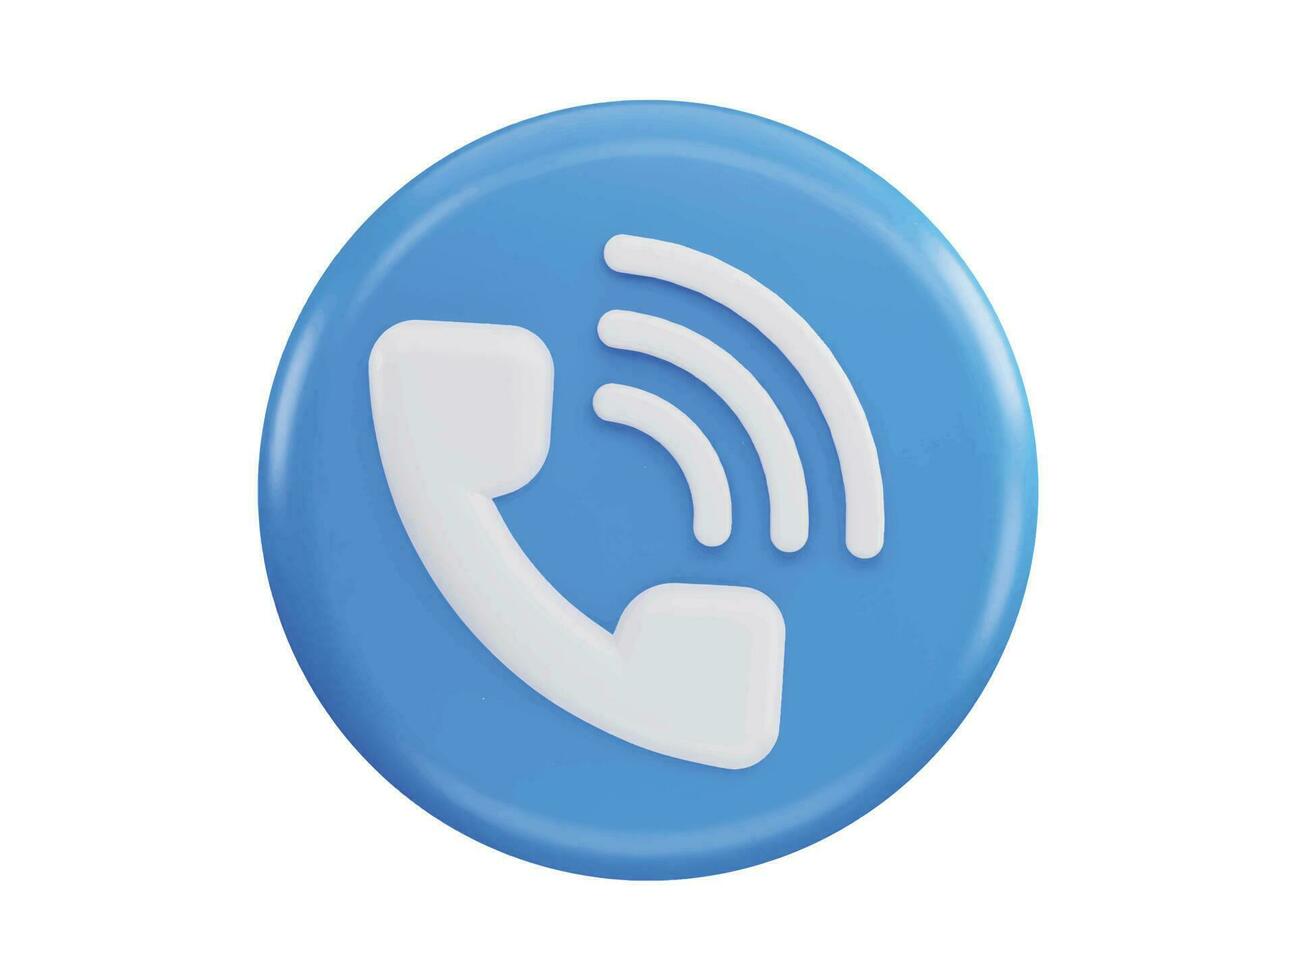 Phone call contact voice communication button 3d rendering vector icon illustration